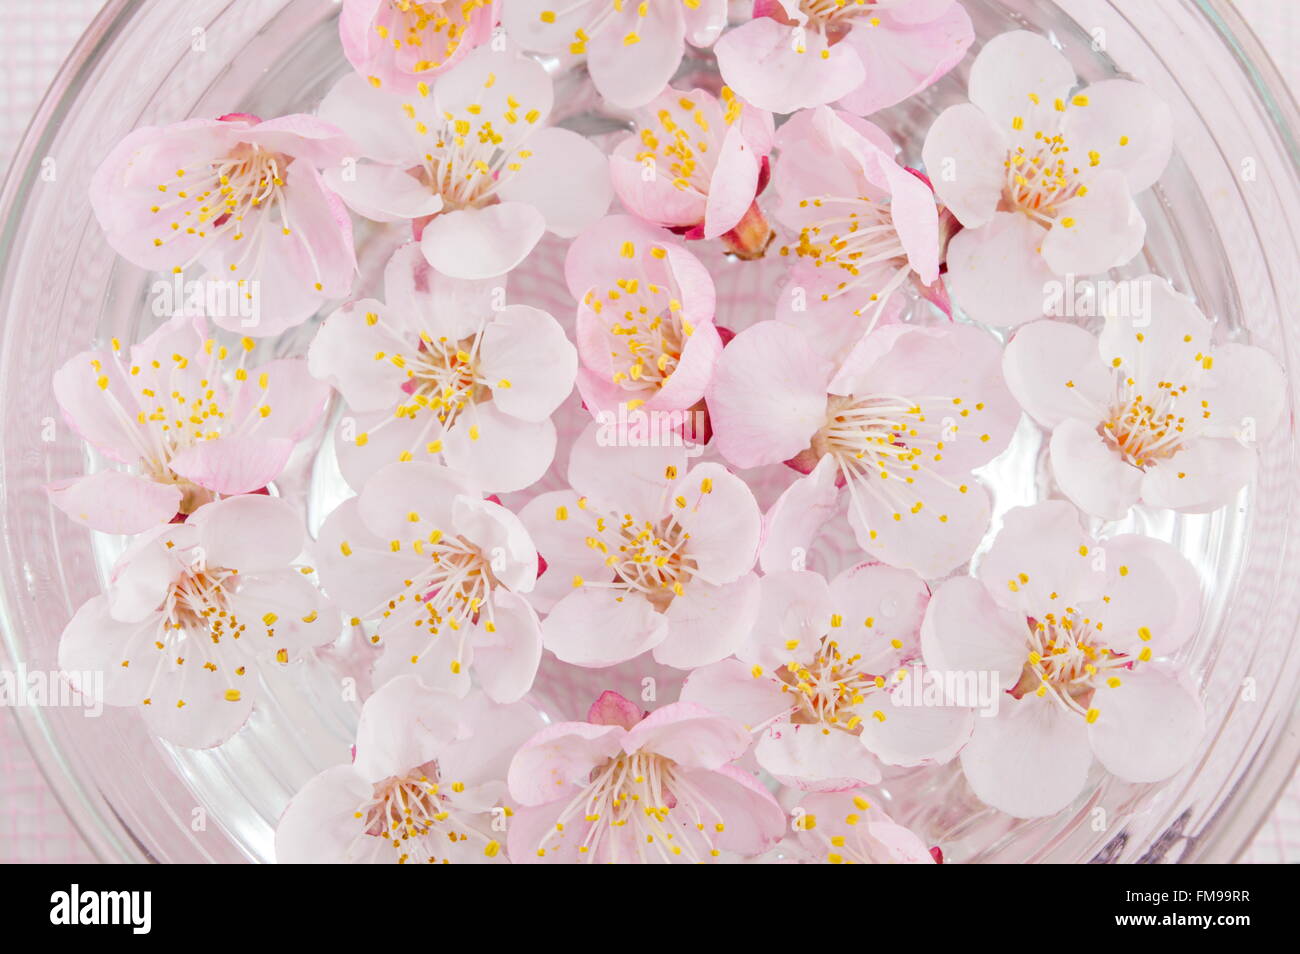 Cherry blossom flowers in a bowl of water Stock Photo